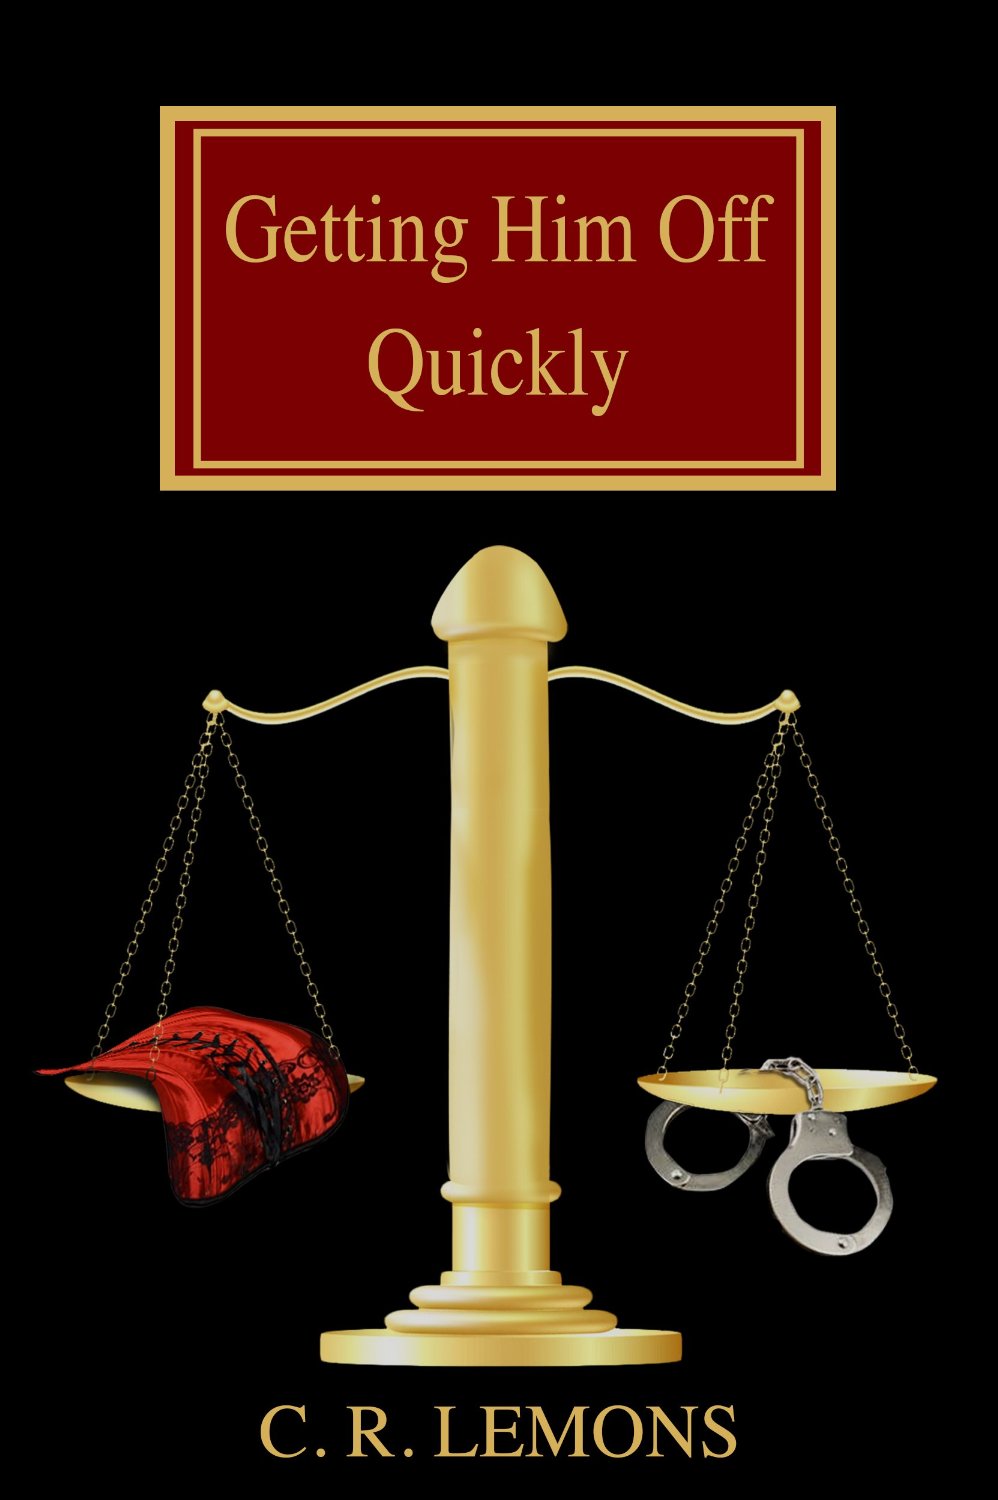 FREE: Getting Him Off Quickly by C. R. Lemons